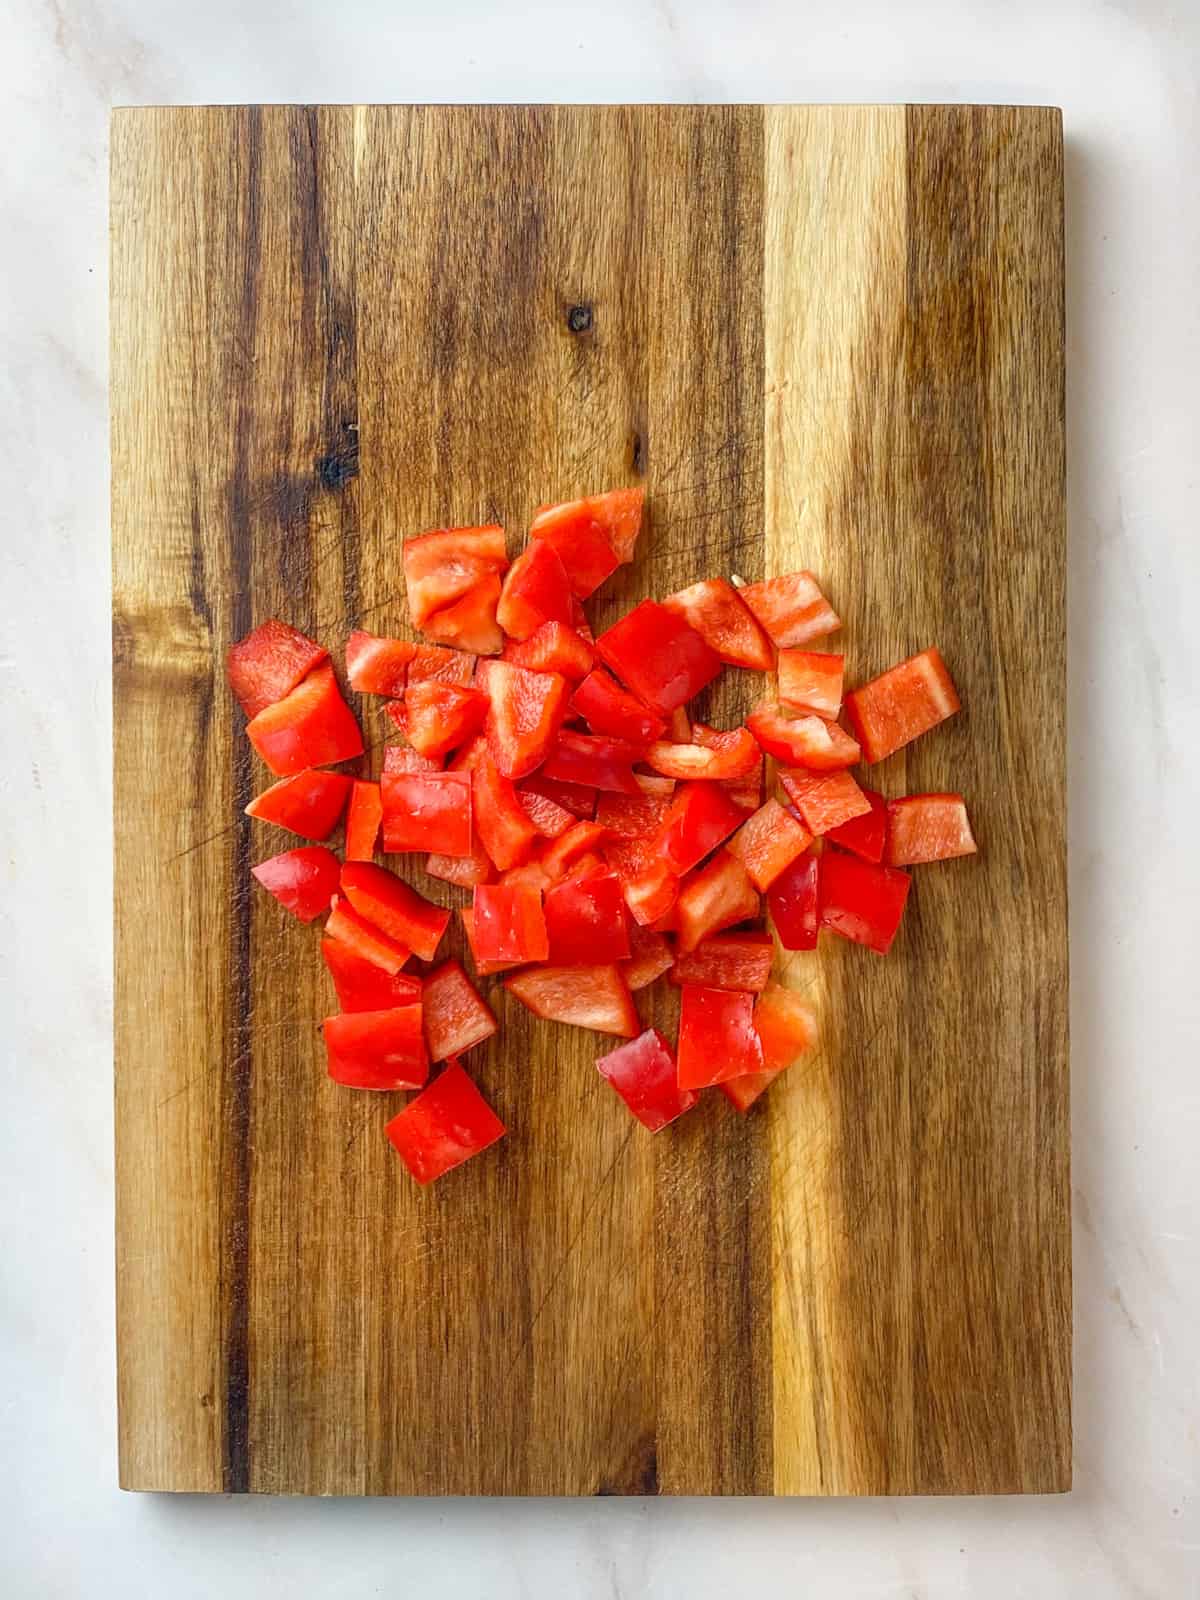 Chopped red bell peppers on a wooden cutting board.